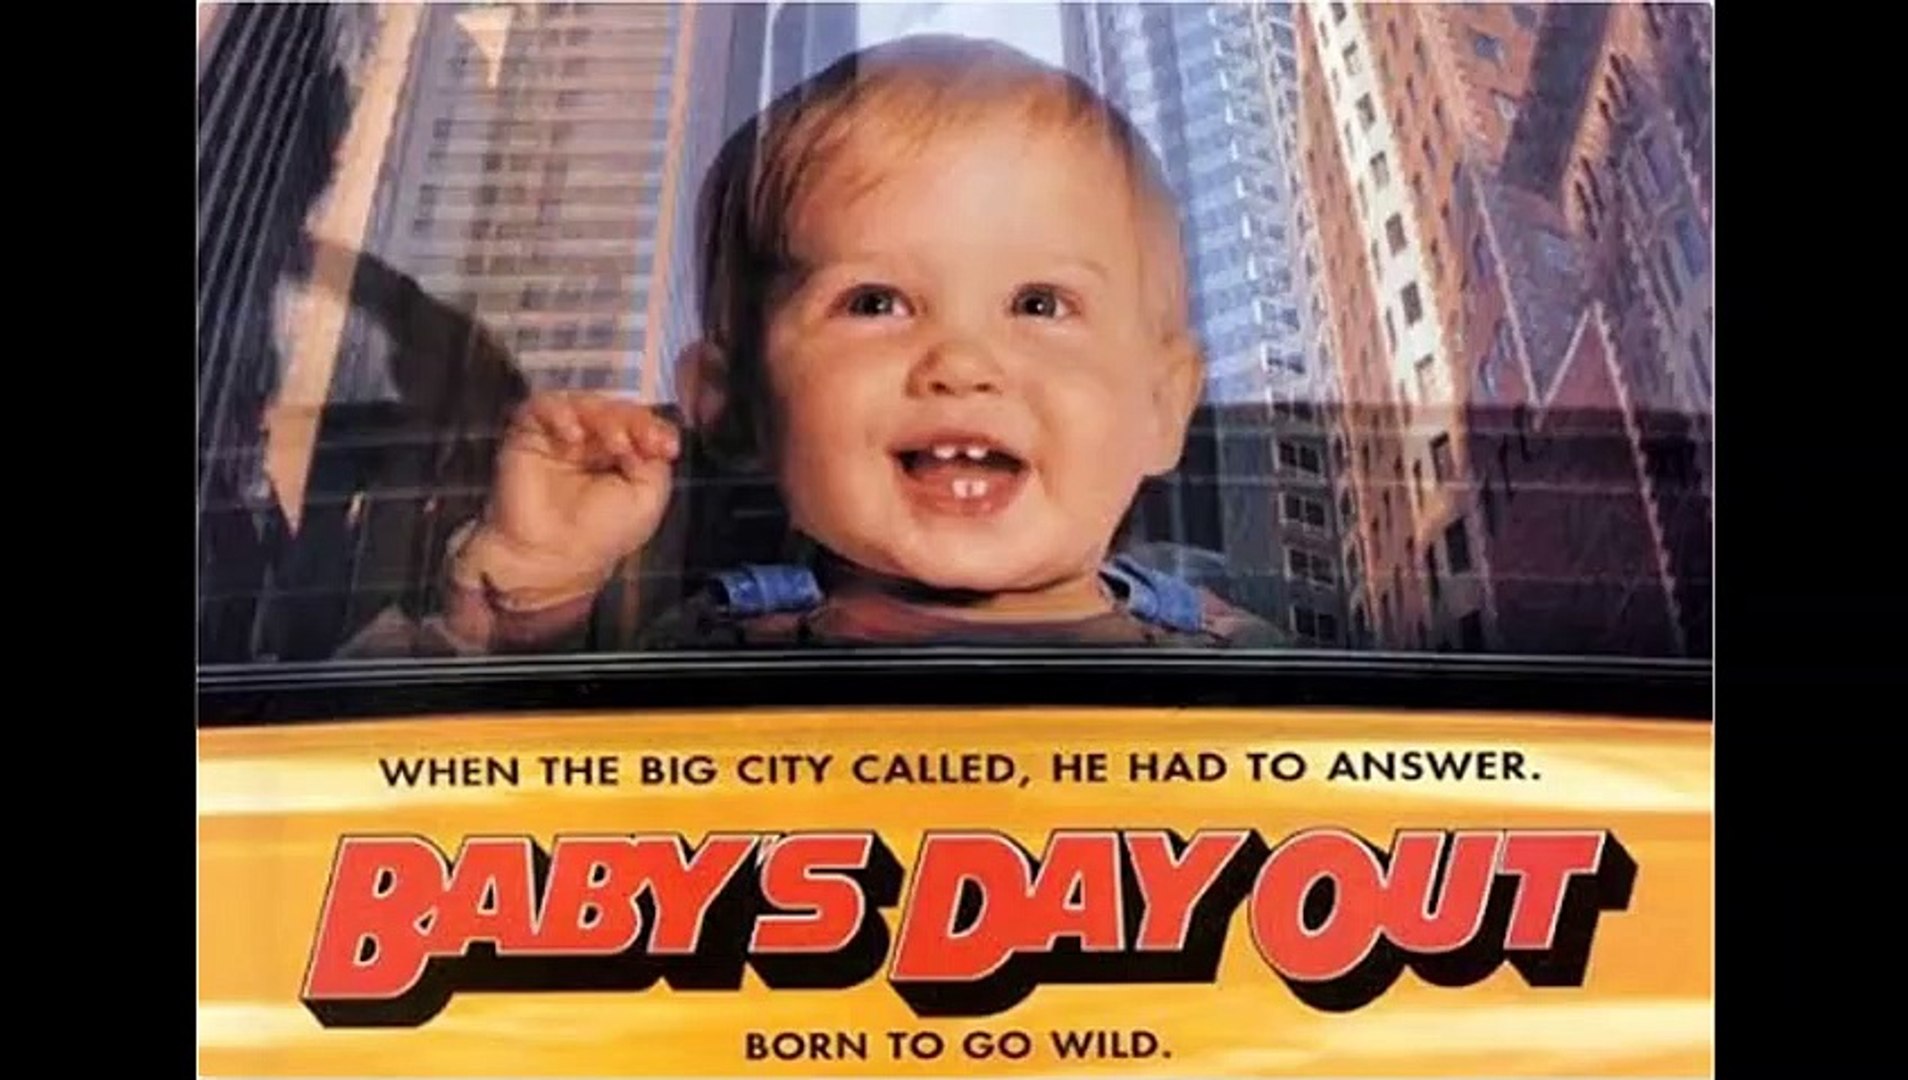 Baby S Day Out 1994 Cast Then And Now 1994 Vs 2020 Video Dailymotion